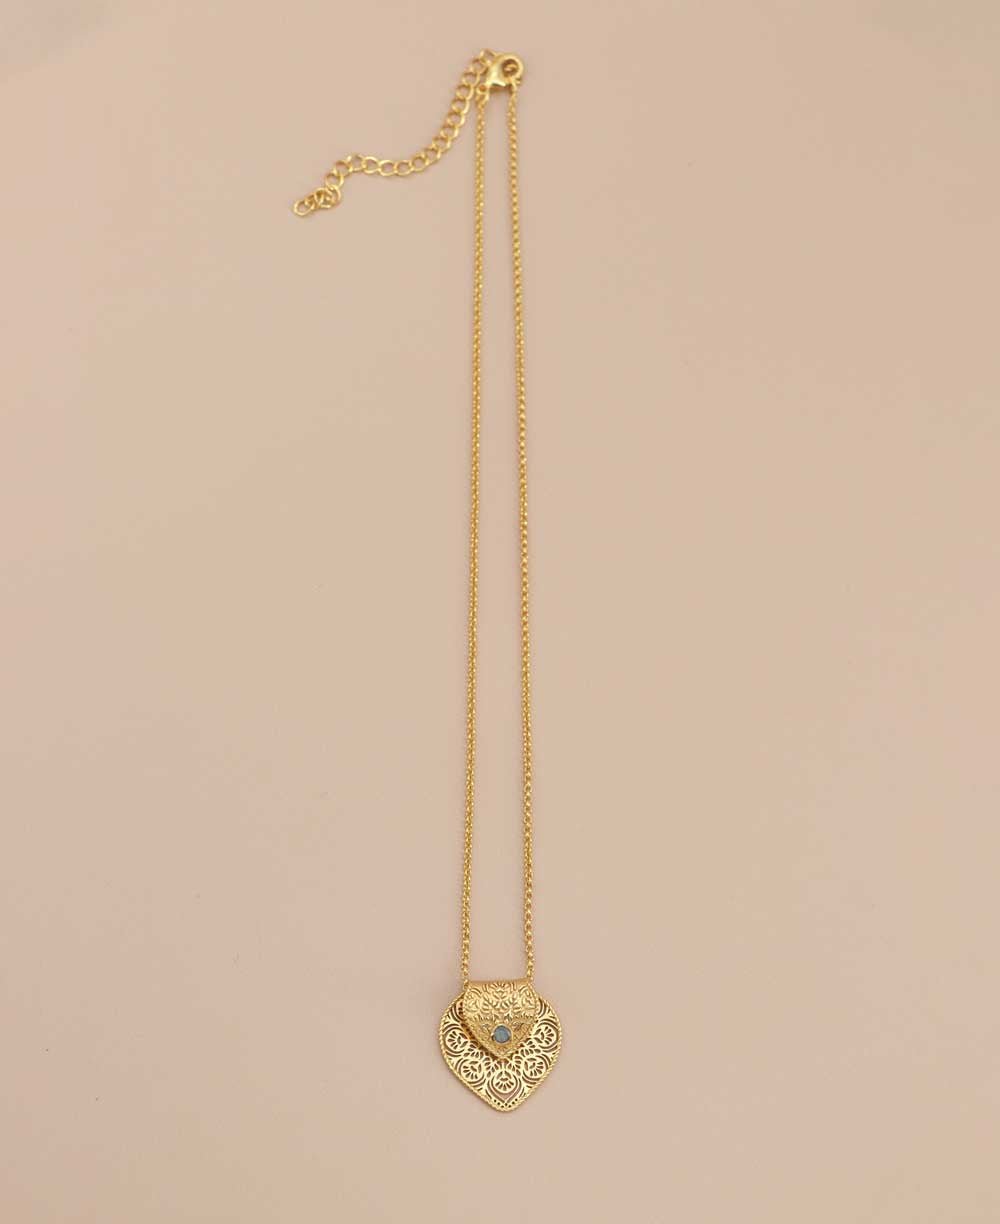 Gold Plated Brass Lotus Petal Mandala Necklace with Labradorite Accent - Necklaces